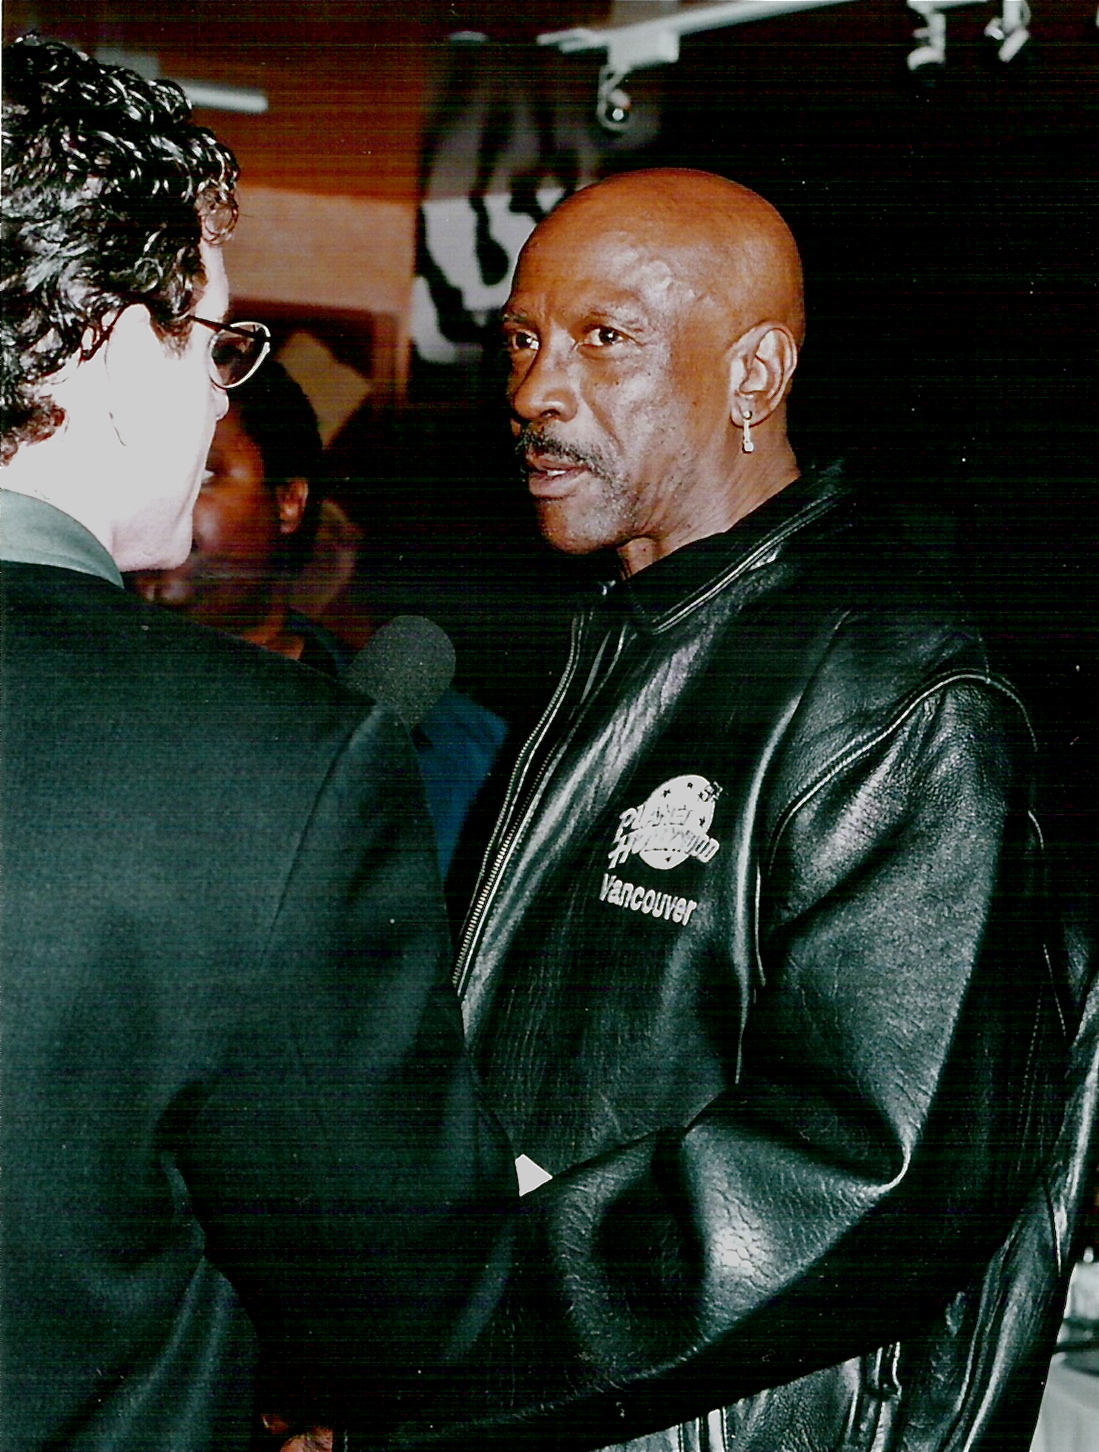 An oscar winner, Lou Gossett Jr perhaps speaking with a future statue holder (moi CK) at Planet Hollywood, Vancouver cira 1998.